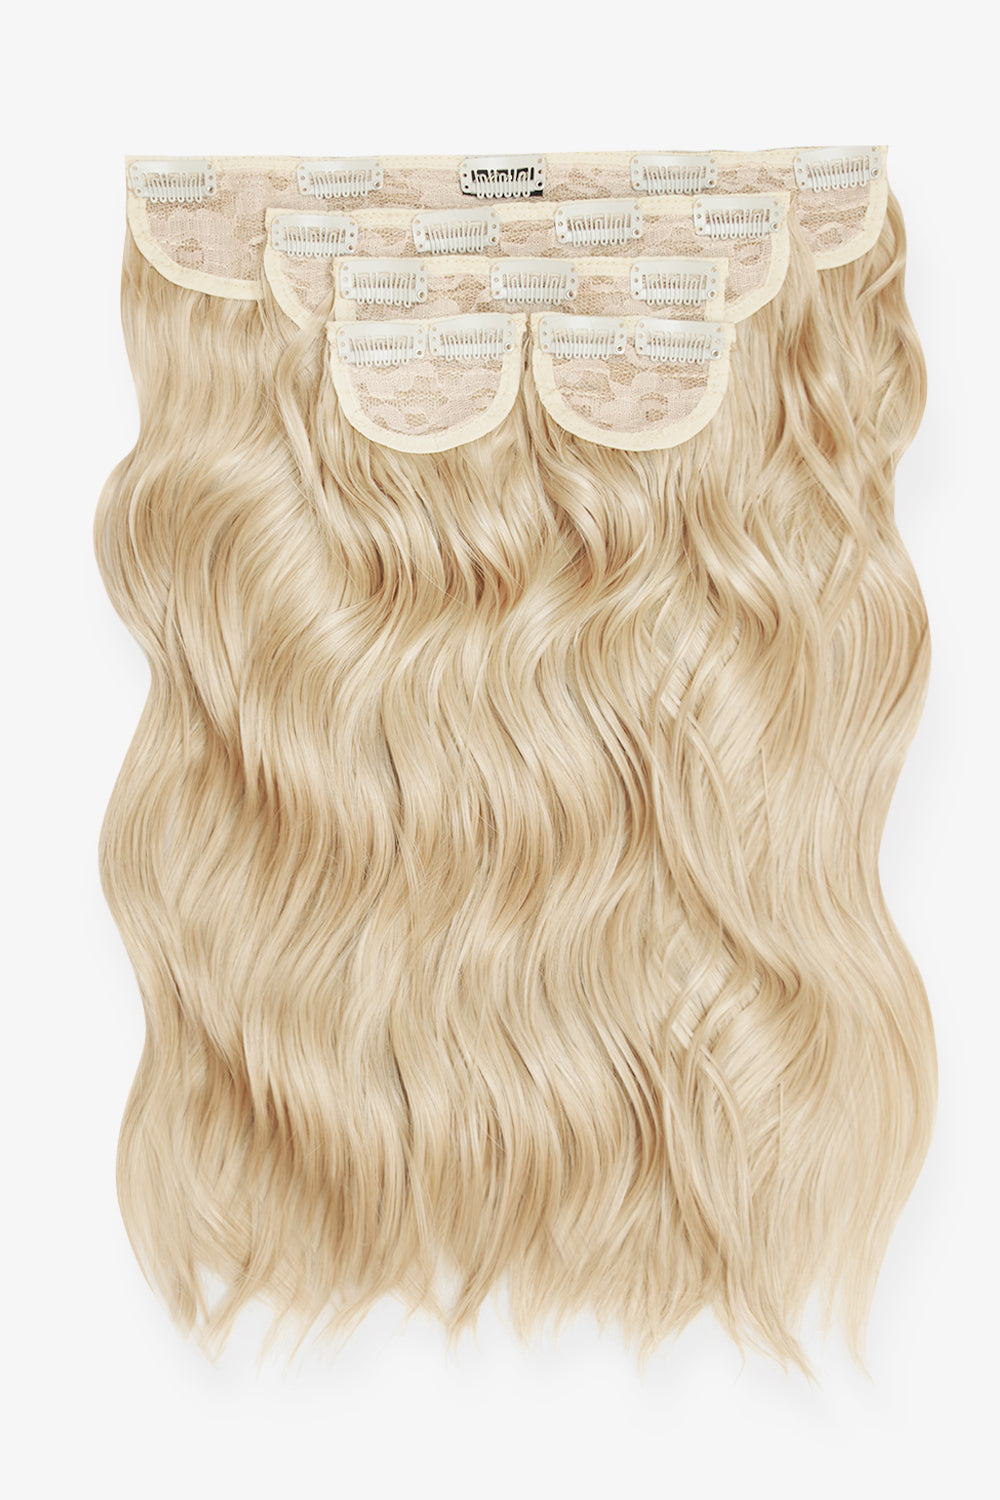 Super Thick 16’’ 5 Piece Brushed Out Wave Clip In Hair Extensions - Light Blonde